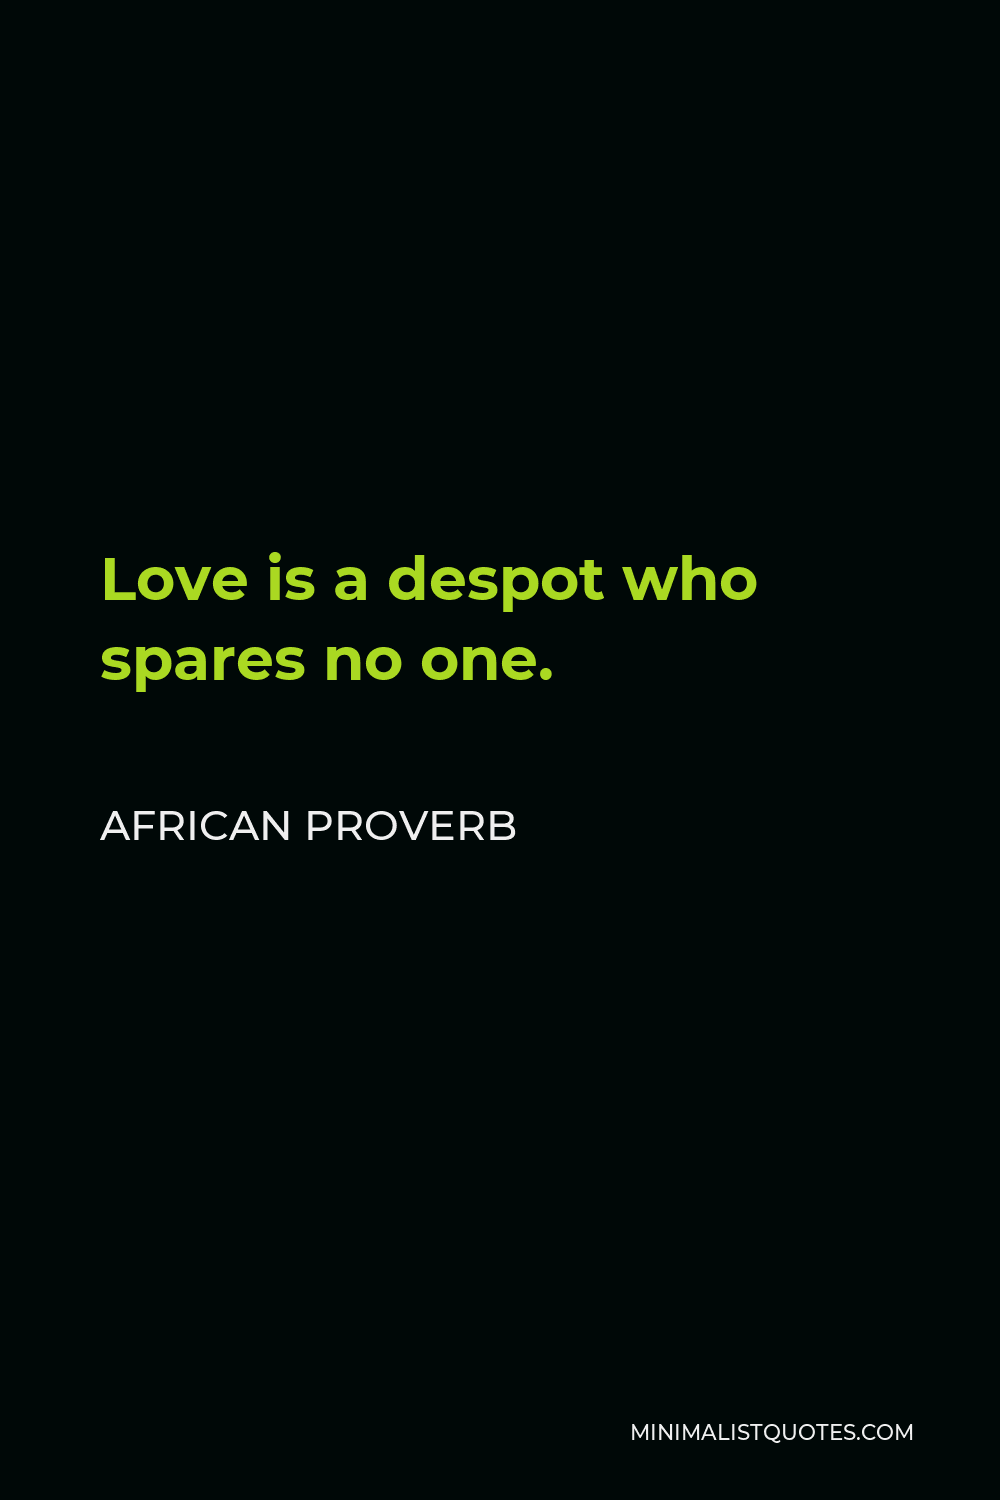 African Proverb Quote - Love is a despot who spares no one.